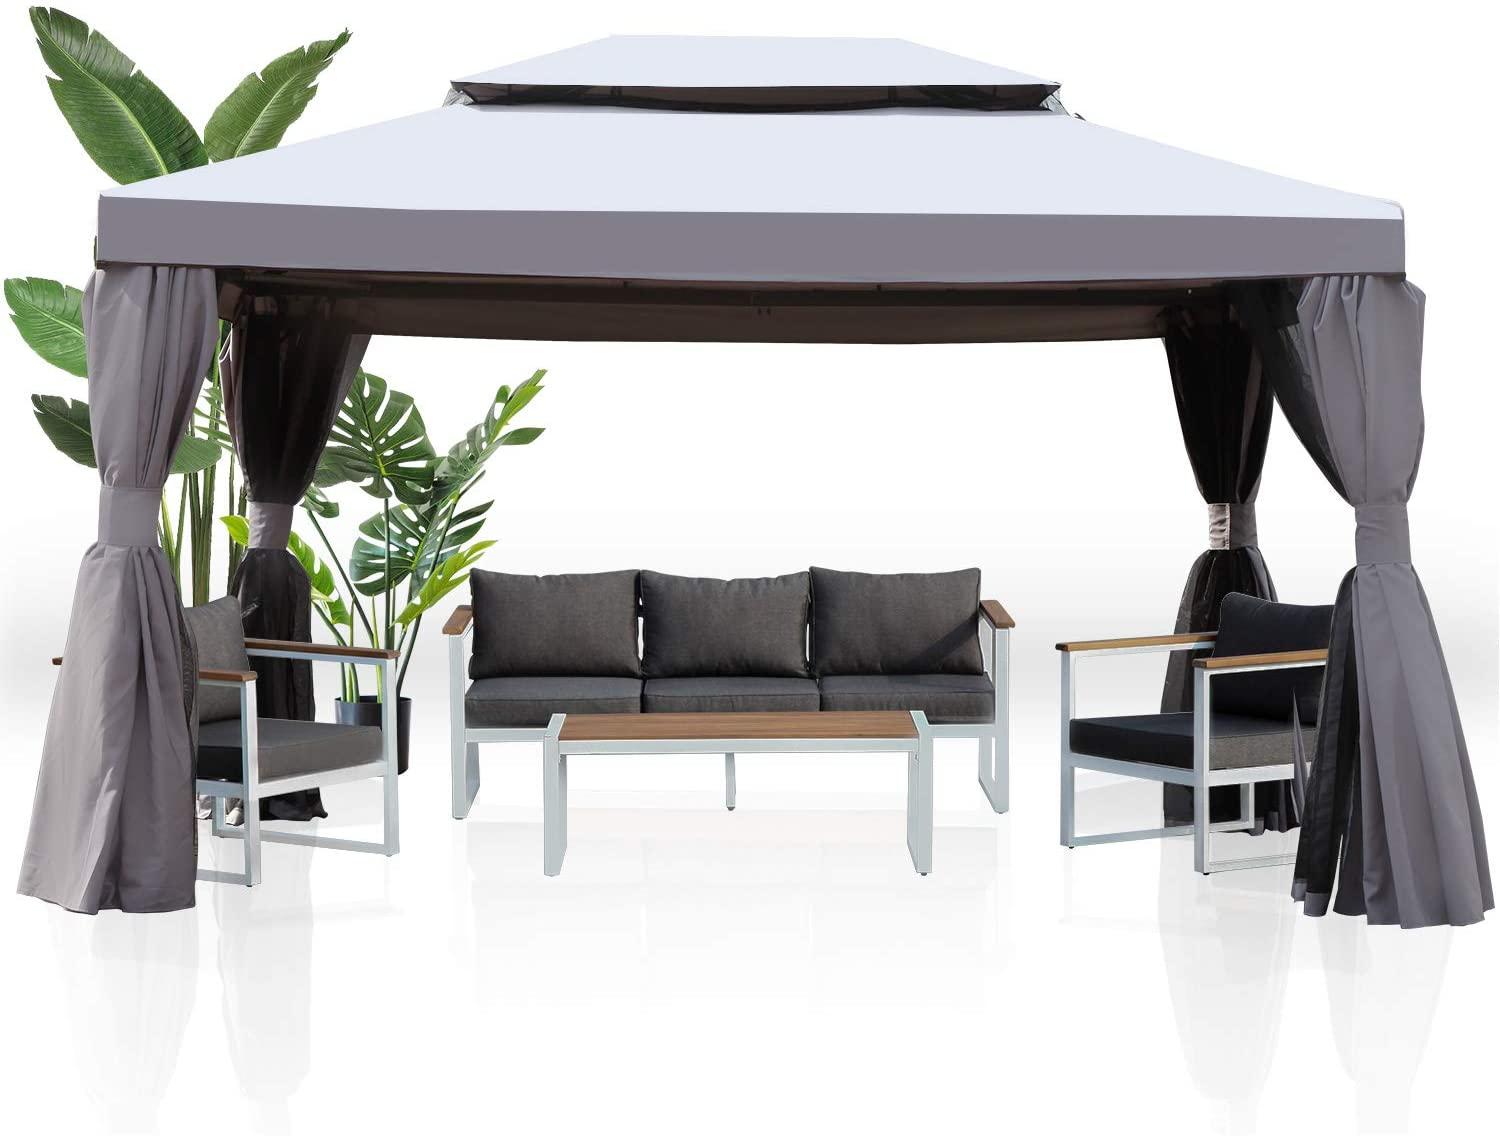 Mydepot SR Gazebo for Patios Outdoor Gazebo with Mosquito Netting and Curtains Outdoor Privacy Screen for Deck Backyard